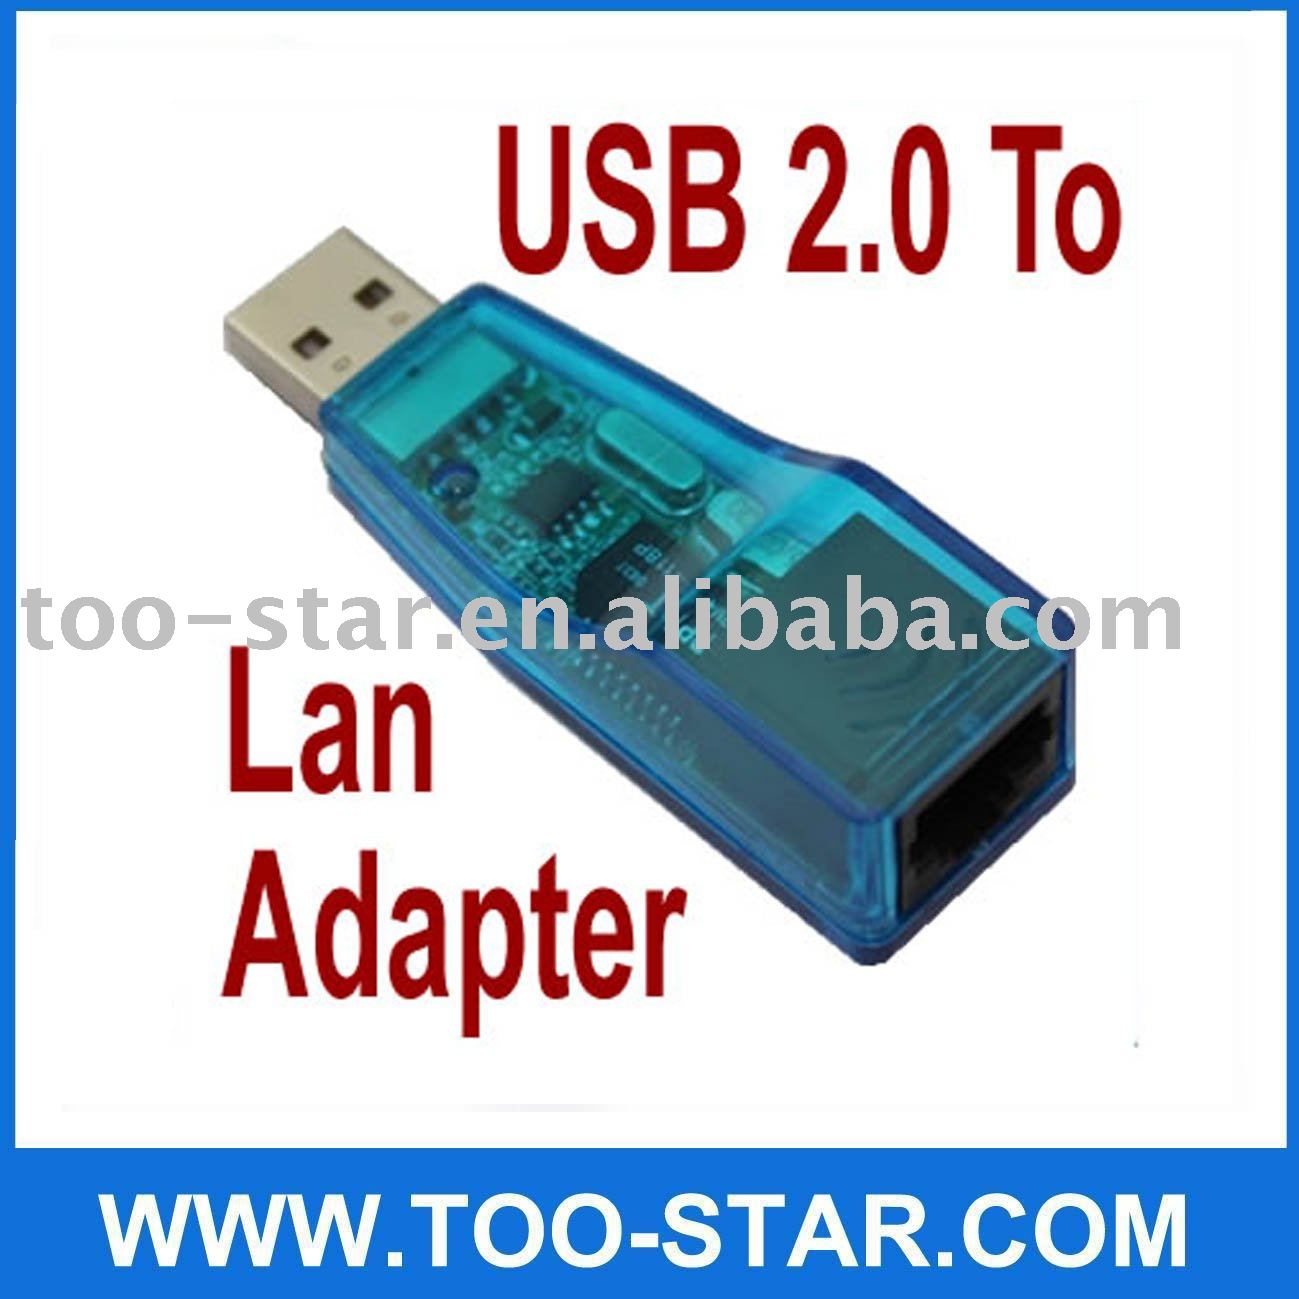 rd9700 usb ethernet adapter driver free download windows 10